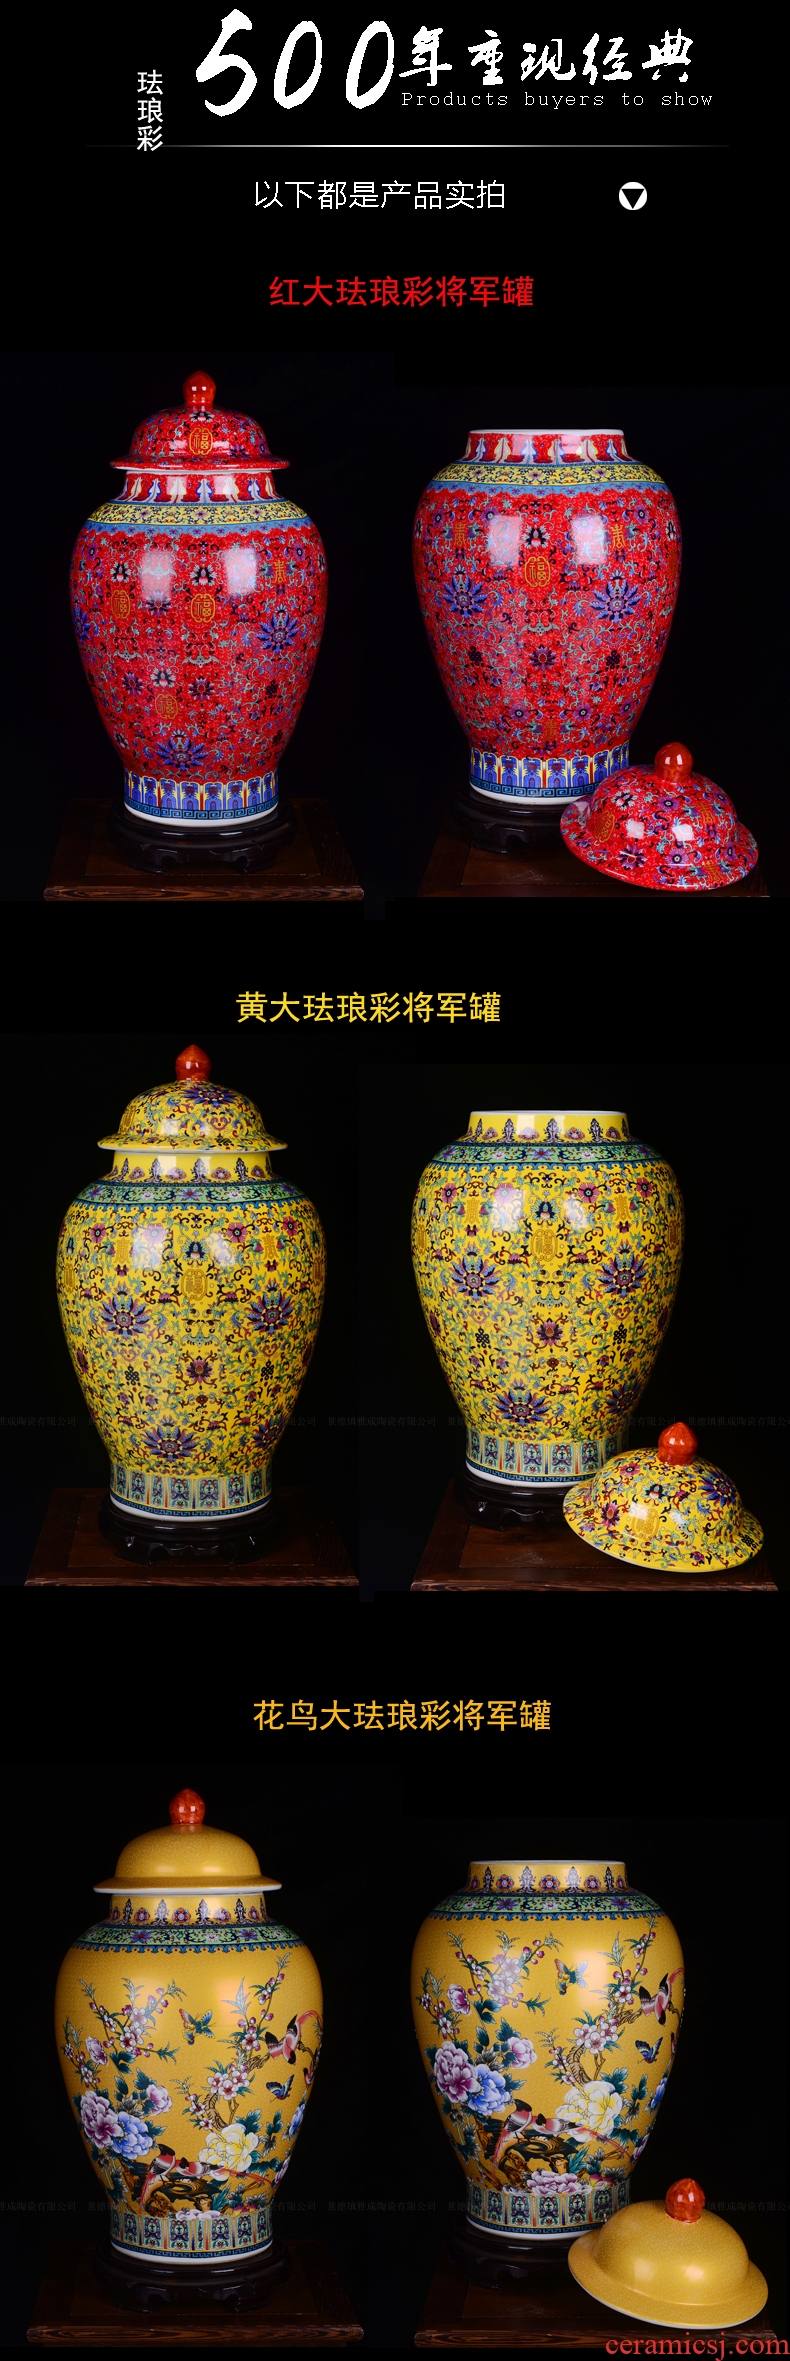 The new European creative ceramic vase furnishing articles furnishing articles sitting room flower arranging household act The role ofing is tasted porcelain decorative vase - 521880604586